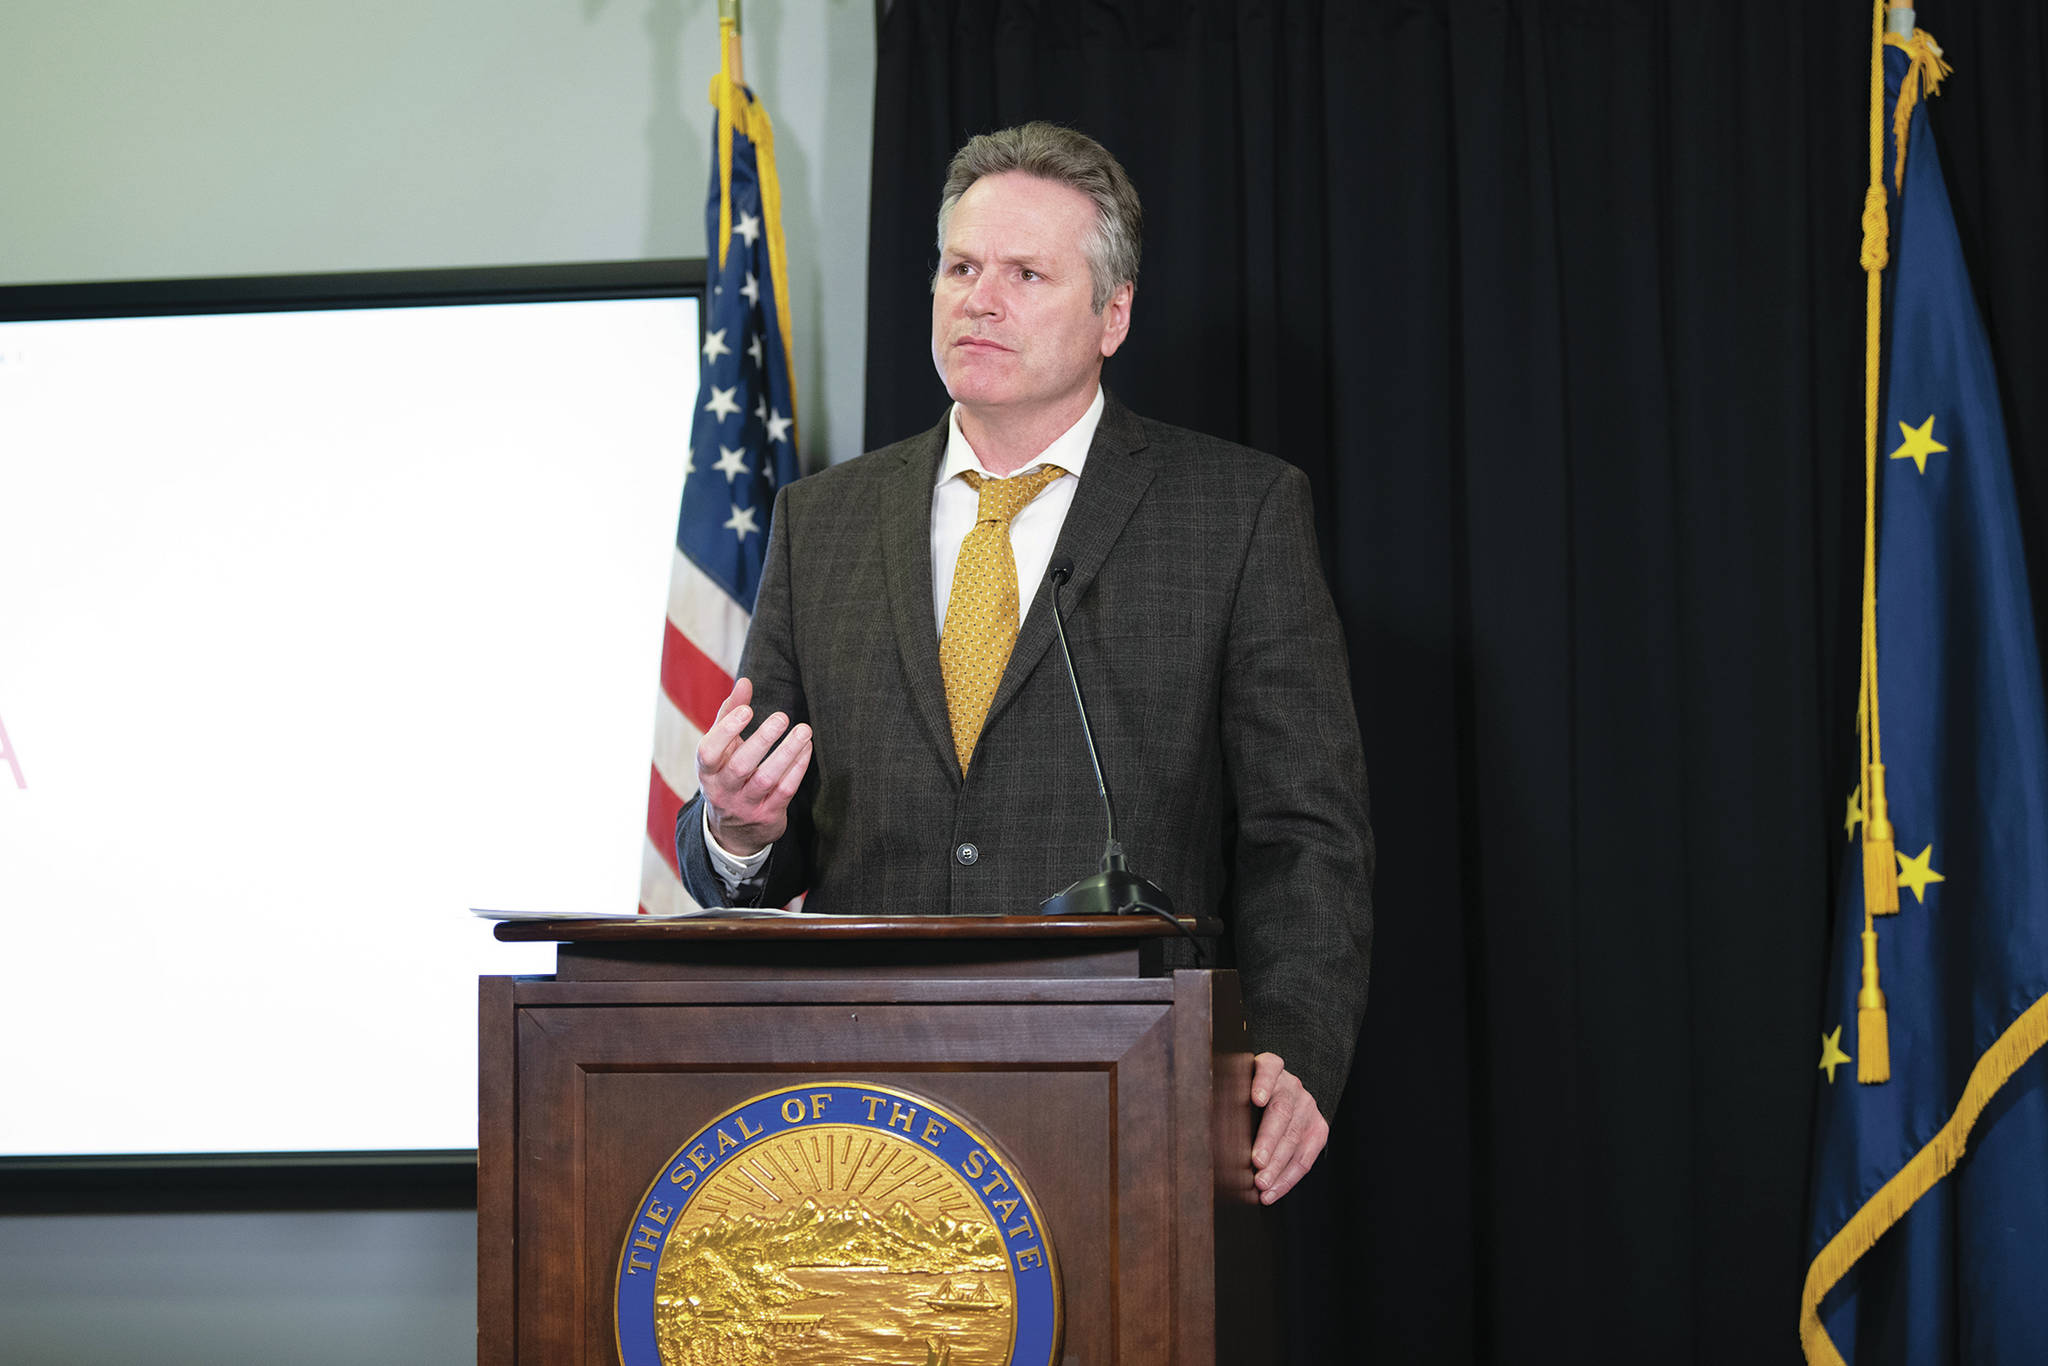 Gov. Mike Dunleavy speaks during a Tuesday, April 7, 2020 press conference in the Atwood Building in Anchorage, Alaska. (Photo courtesy Office of the Governor)